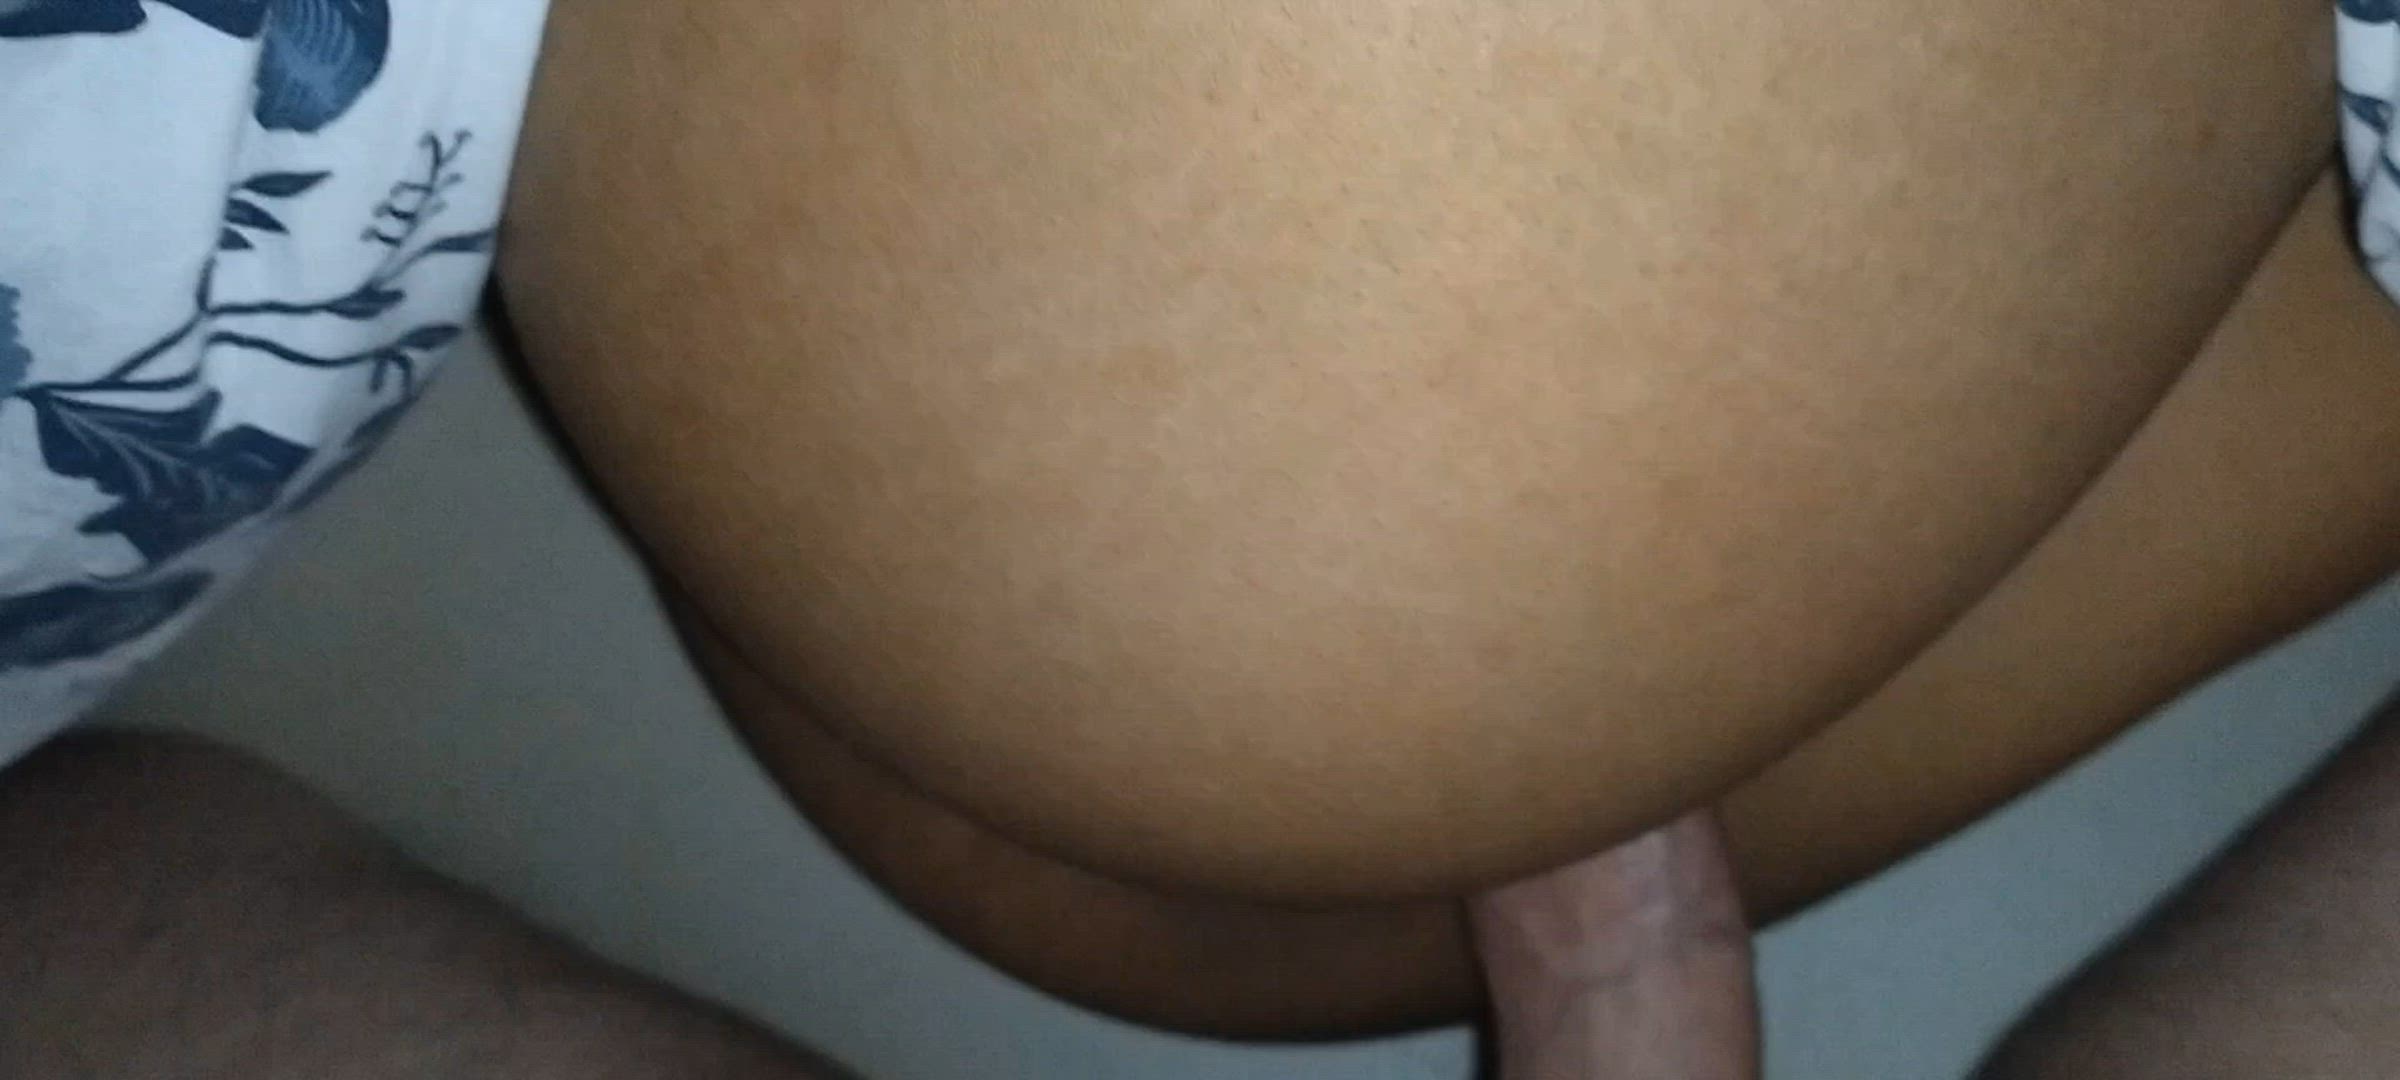 Ass porn video with onlyfans model teasegf <strong>@aznbabeinnorway</strong>